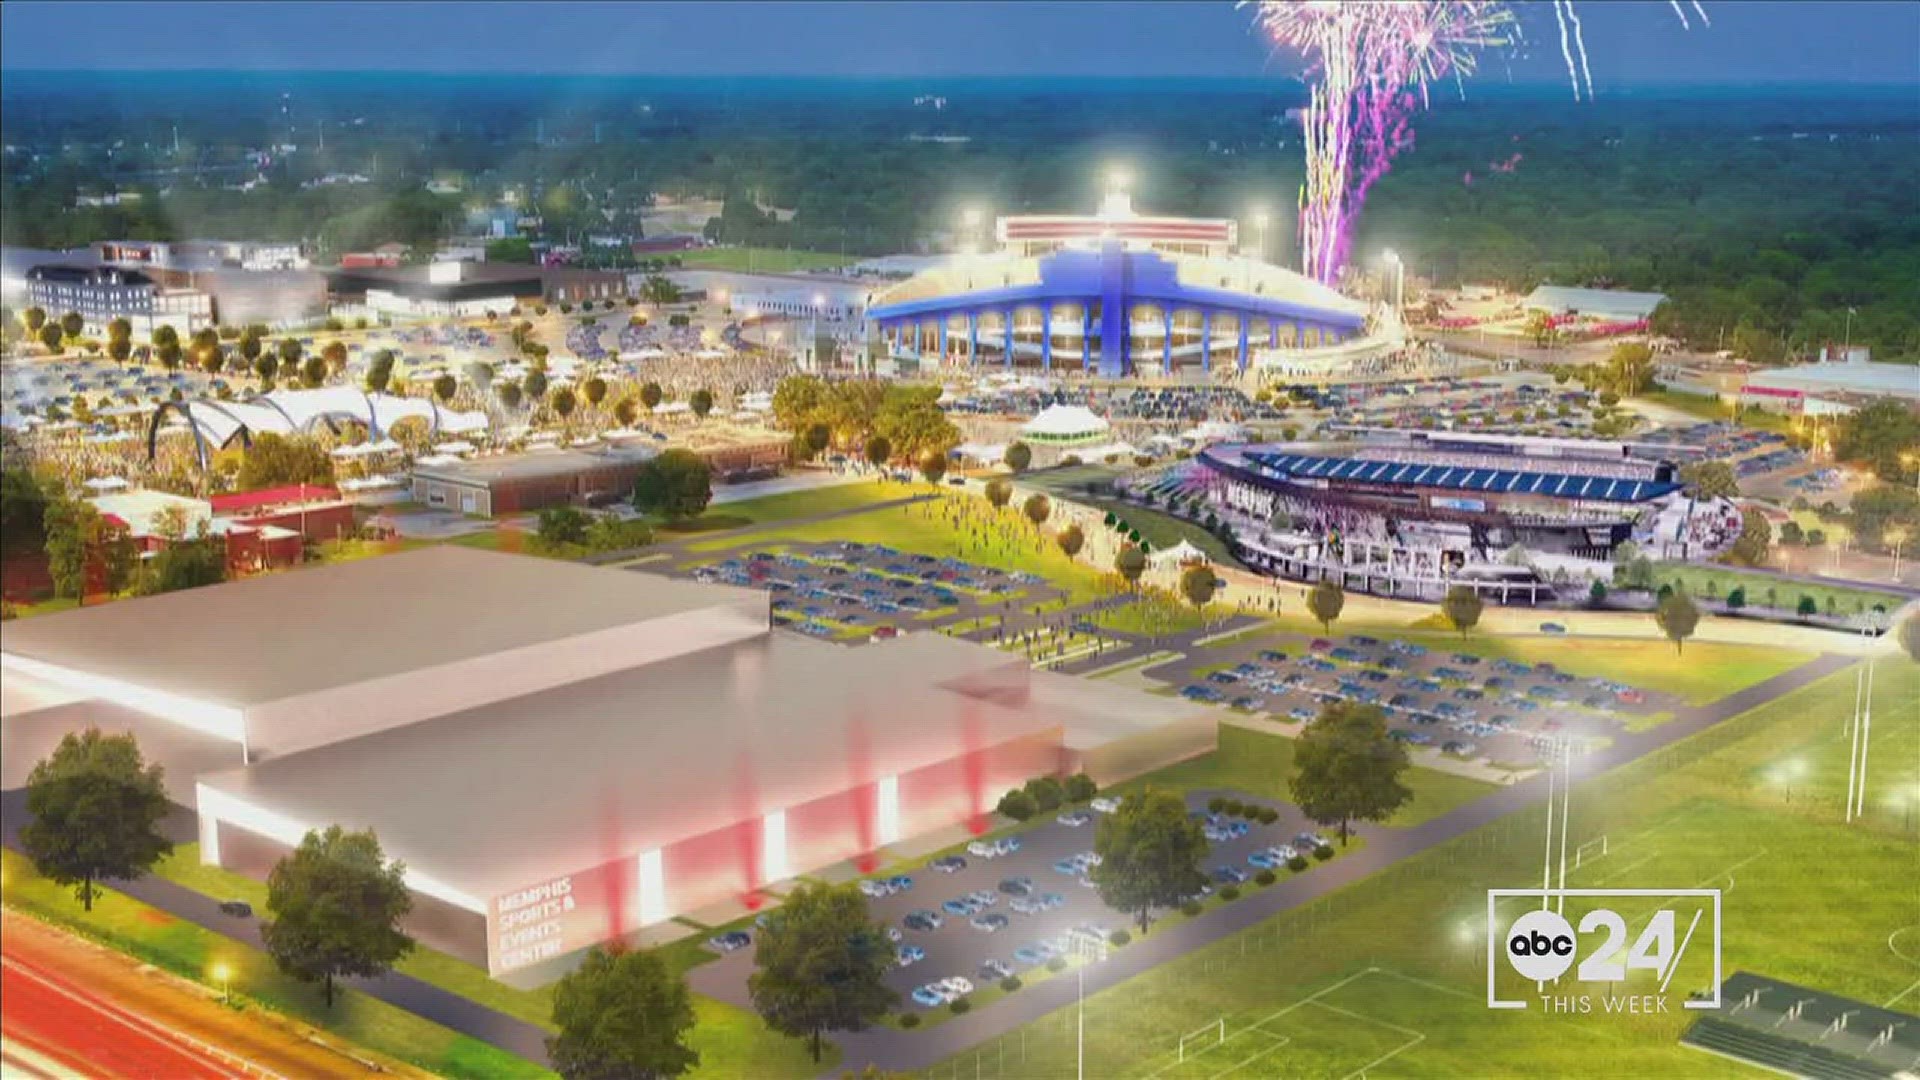 A major source of funding for Mayor Jim Strickland's plan to turn the city into a "world-class sports destination" was approved by the Tennessee General Assembly.